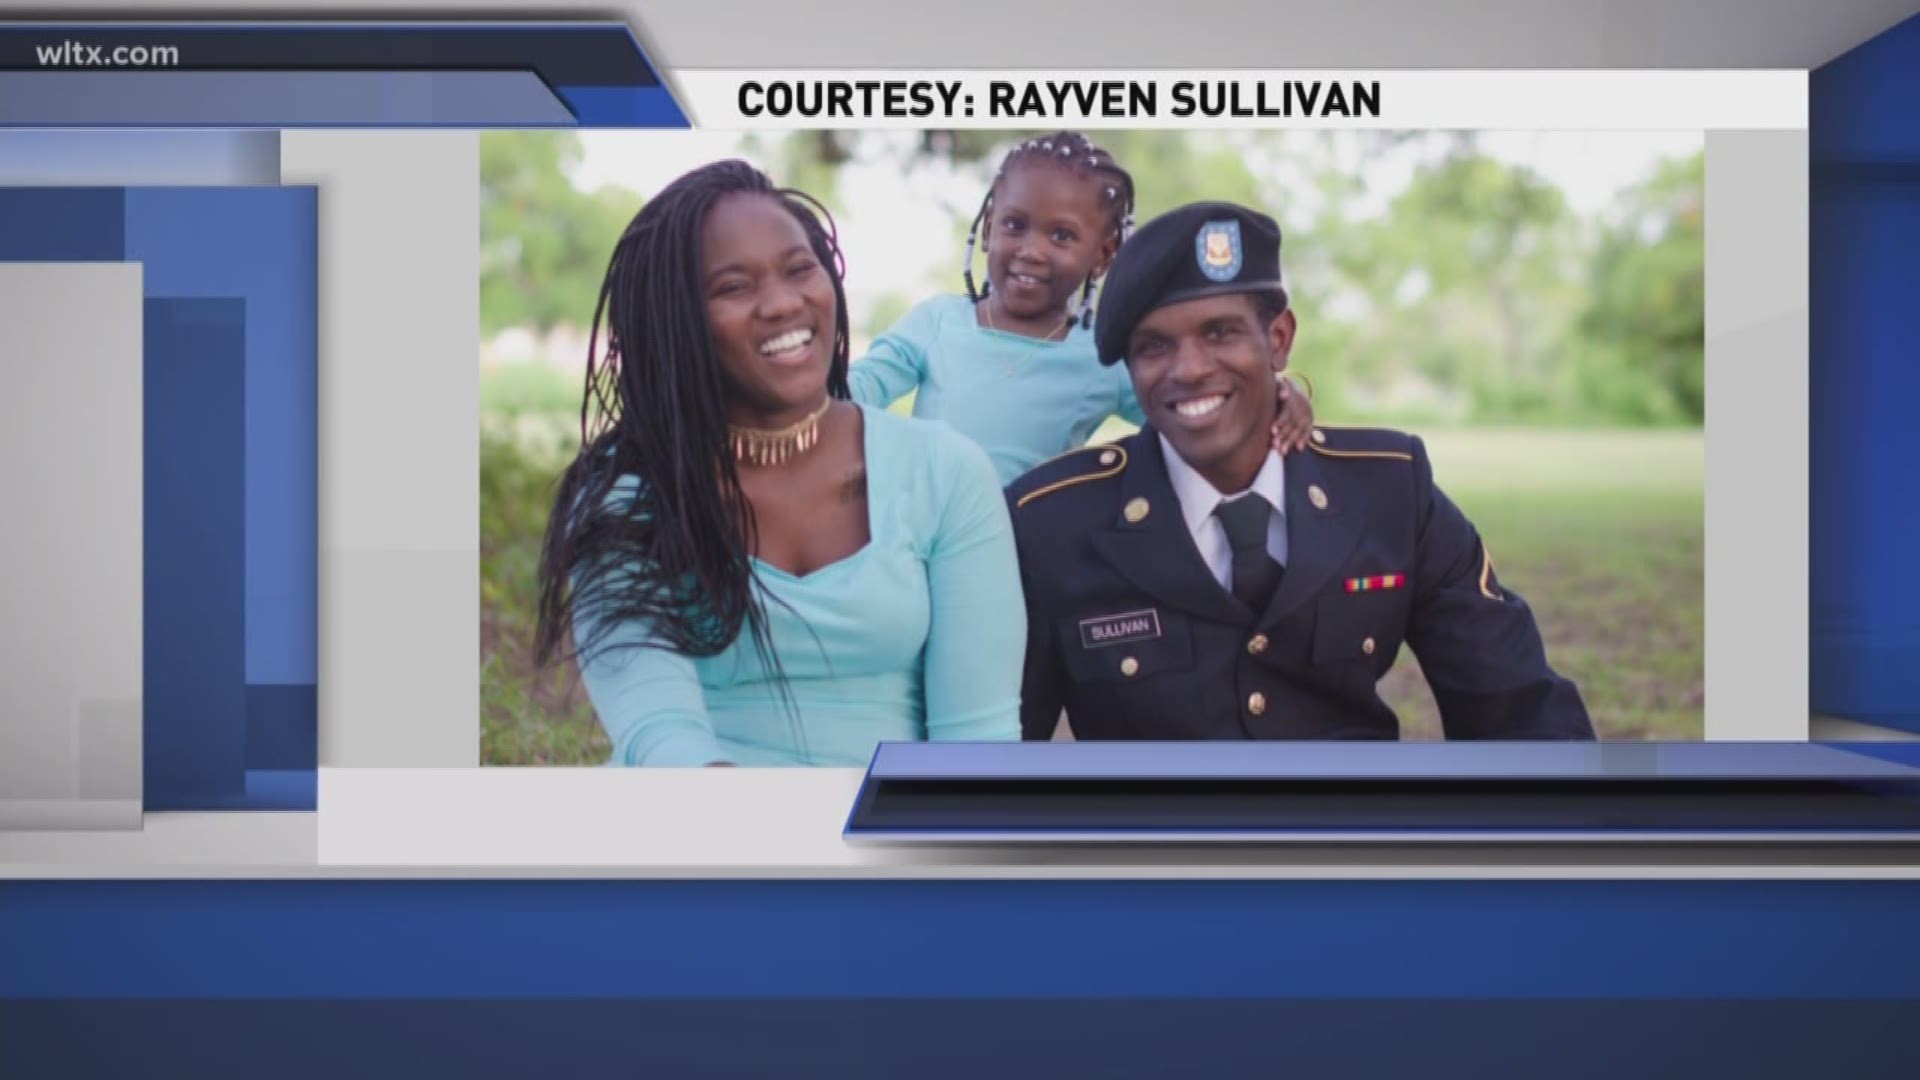 24-year-old Spc. Javion Shavonte Sullivan of Fort Mill was taking part in Operation Inherent Resolve, an effort to combat ISIS in Iraq.